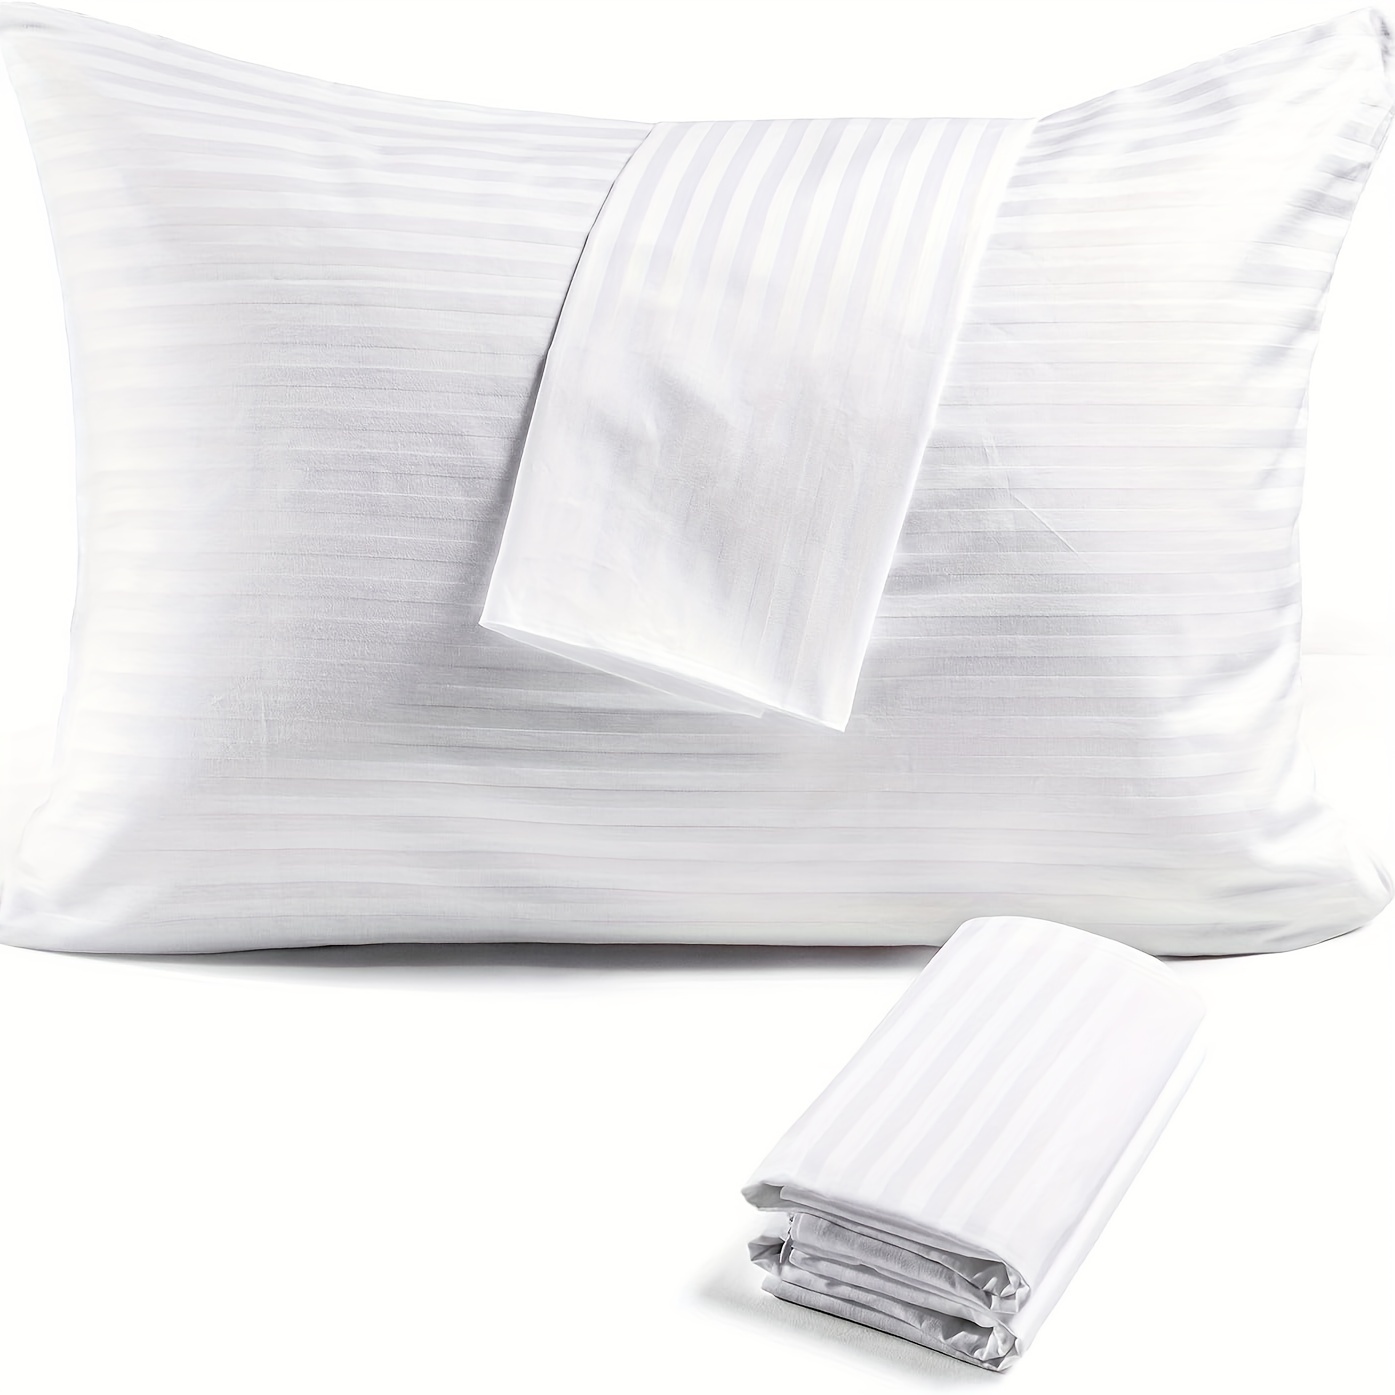 

2pcs/4pcs Pillow Protectors With Zipper, Luxury Hotel Quality Pillowcases, Soft, Thick And Breathable, No Pilling, Stripe Weave Pillow Covers, Ideal For Home, Guests, Mother's Day Gift